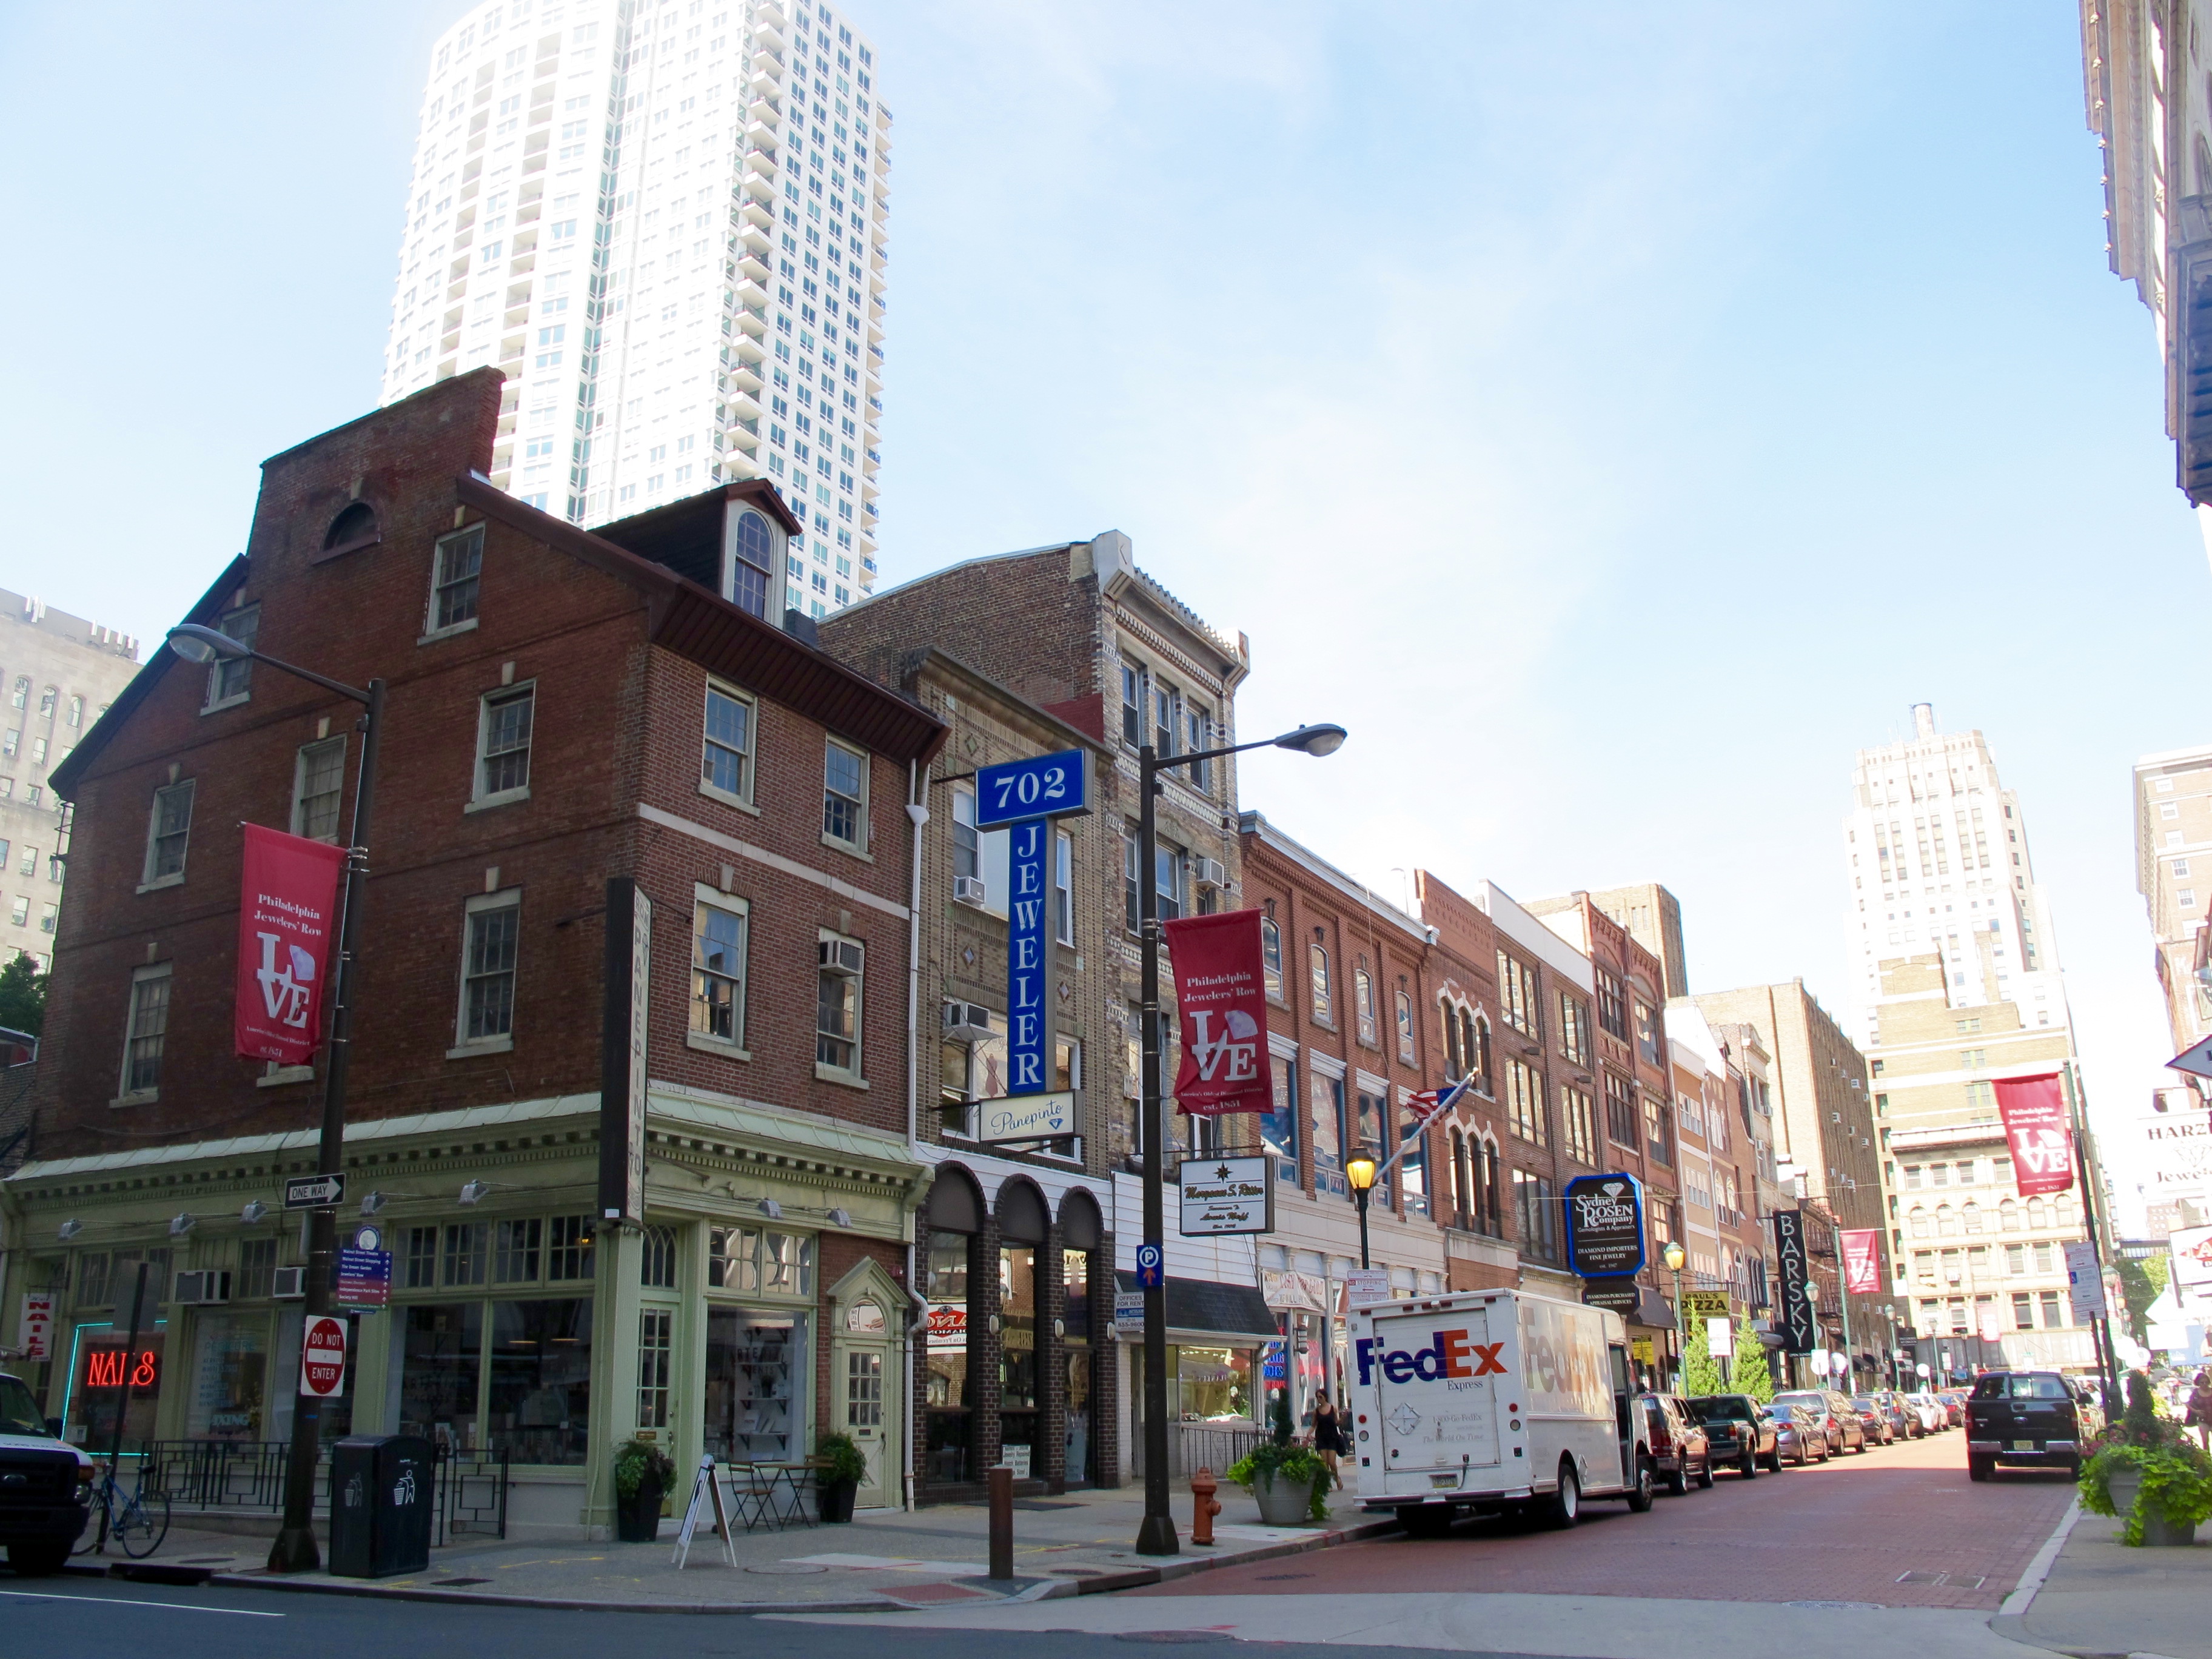 The Preservation Alliance for Greater Philadelphia has fought the proposed demolition of a portion Jeweler's Row by the Toll Brothers